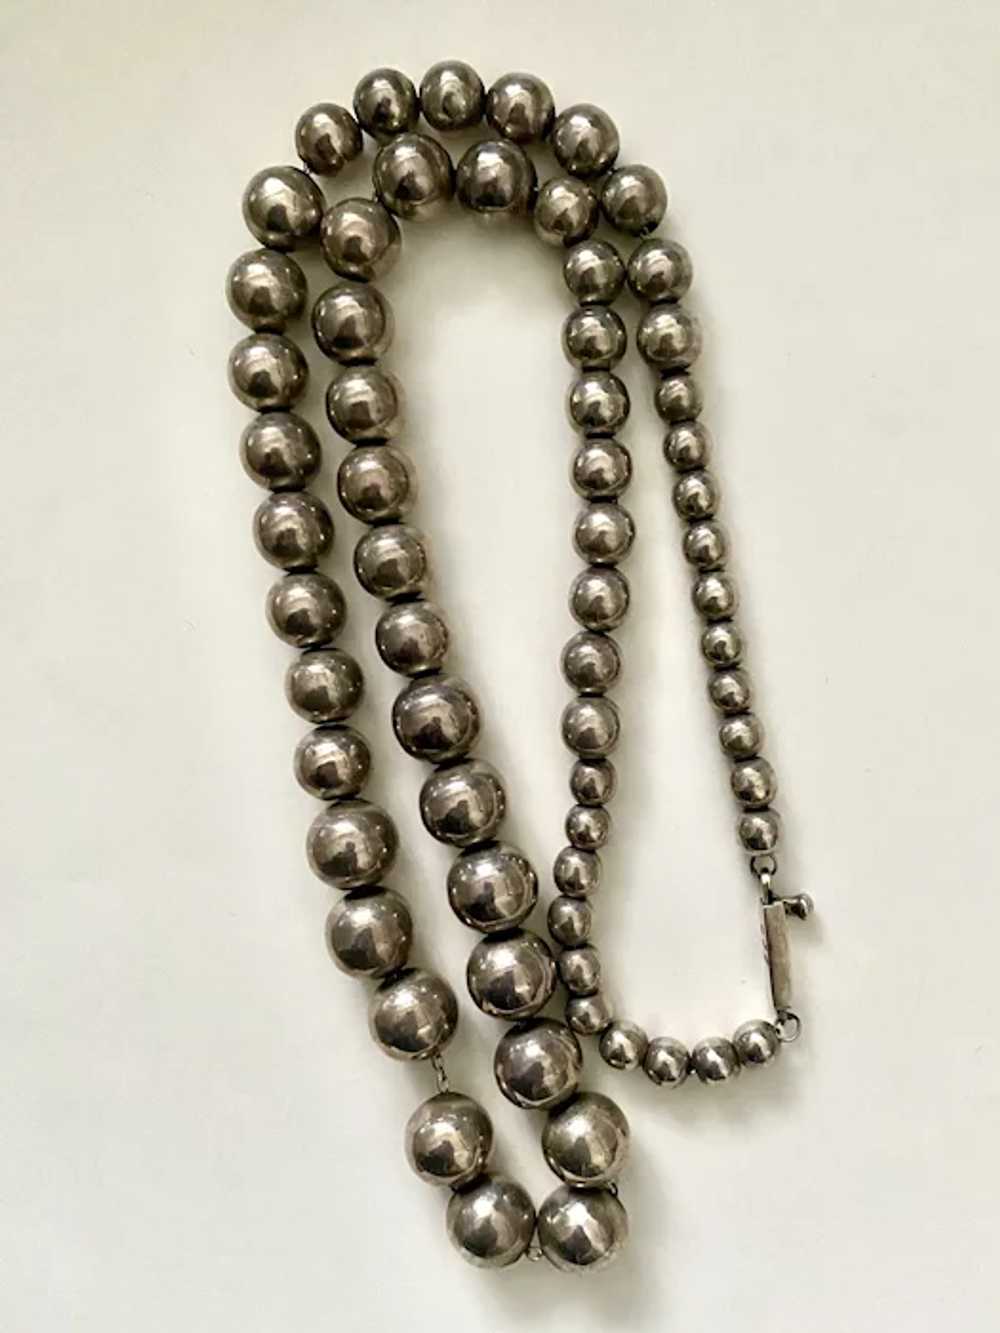 Vintage MEXICAN STERLING Bead Necklace  (28" long) - image 12